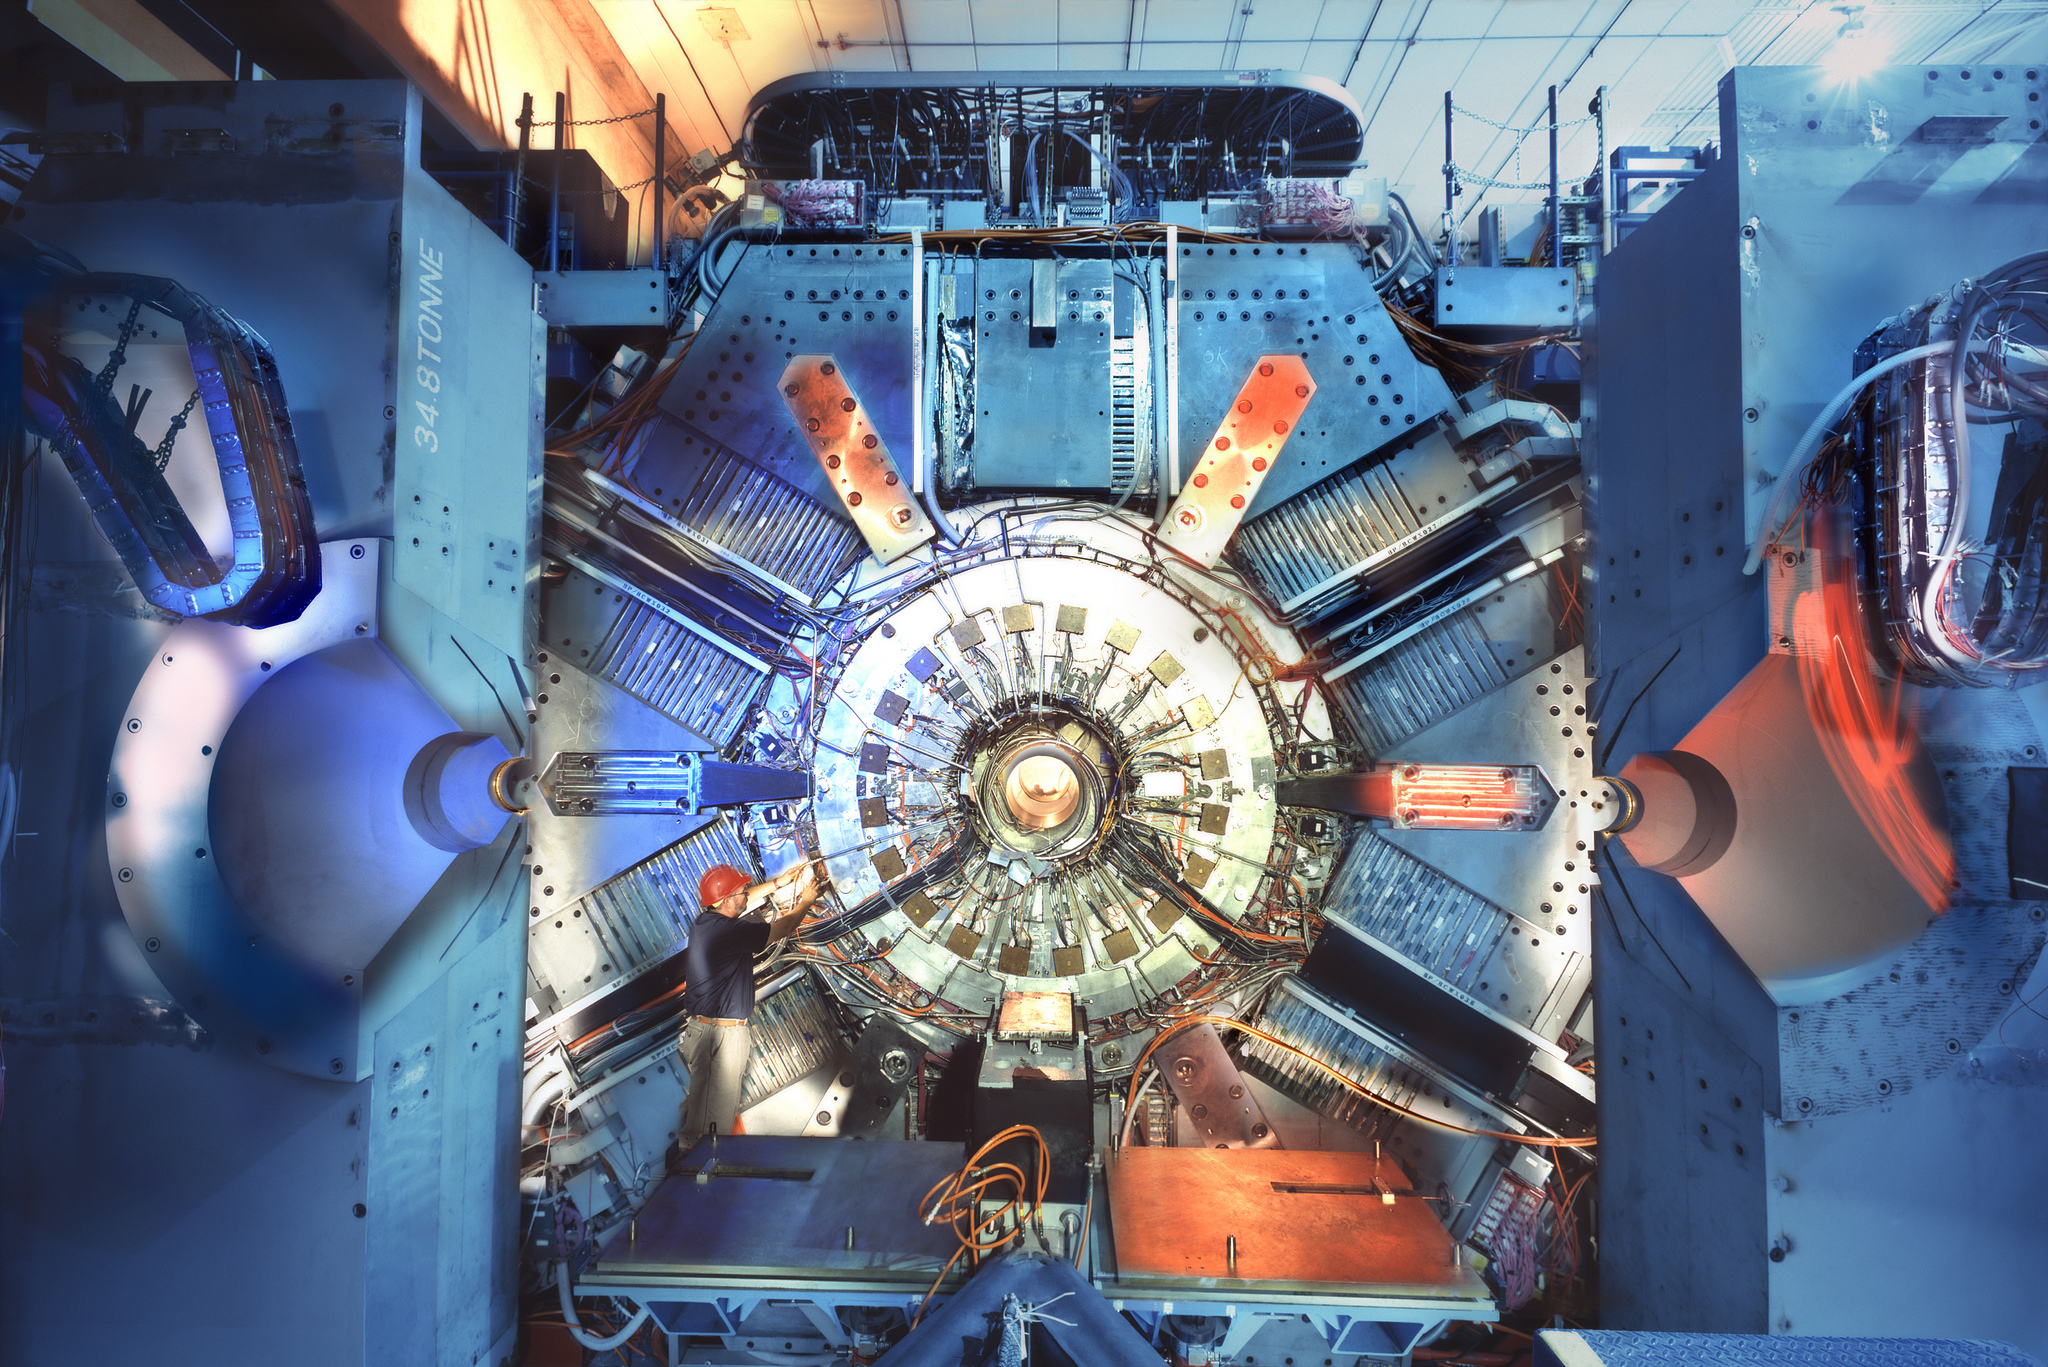 Photo - Data gathered from particle collider experiments using the BaBar detector at SLAC National Accelerator Laboratory, pictured here, were analyzed to search for traces of theorized dark matter particles known as dark photons. (Credit: SLAC National Accelerator Laboratory)